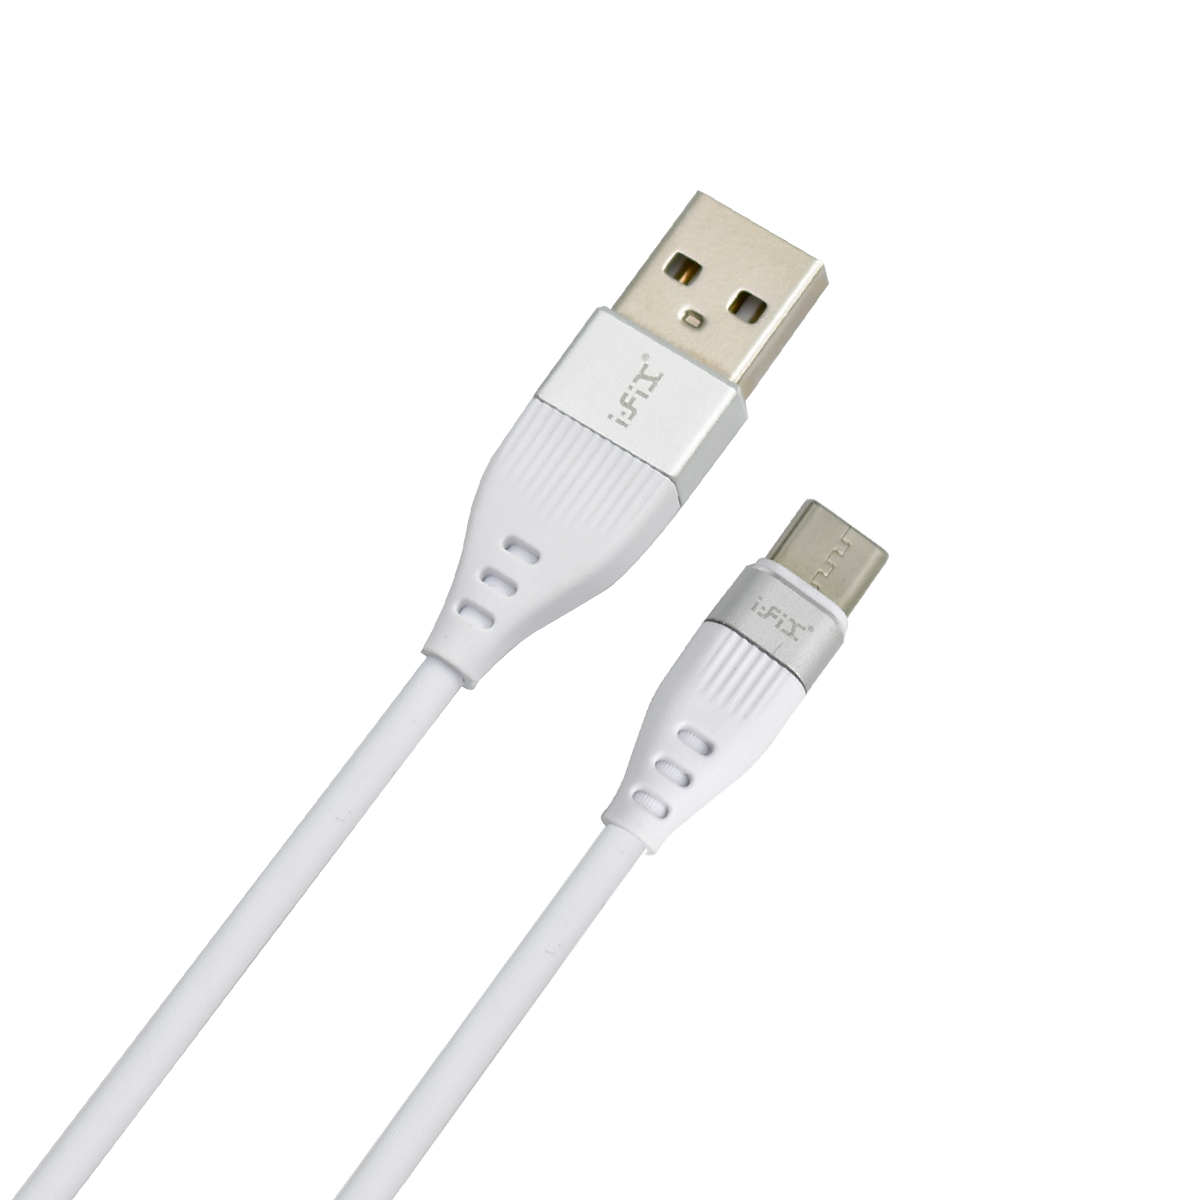 IF-01 Type-C 3.4A Fast Charging USB Data Cable (Black)